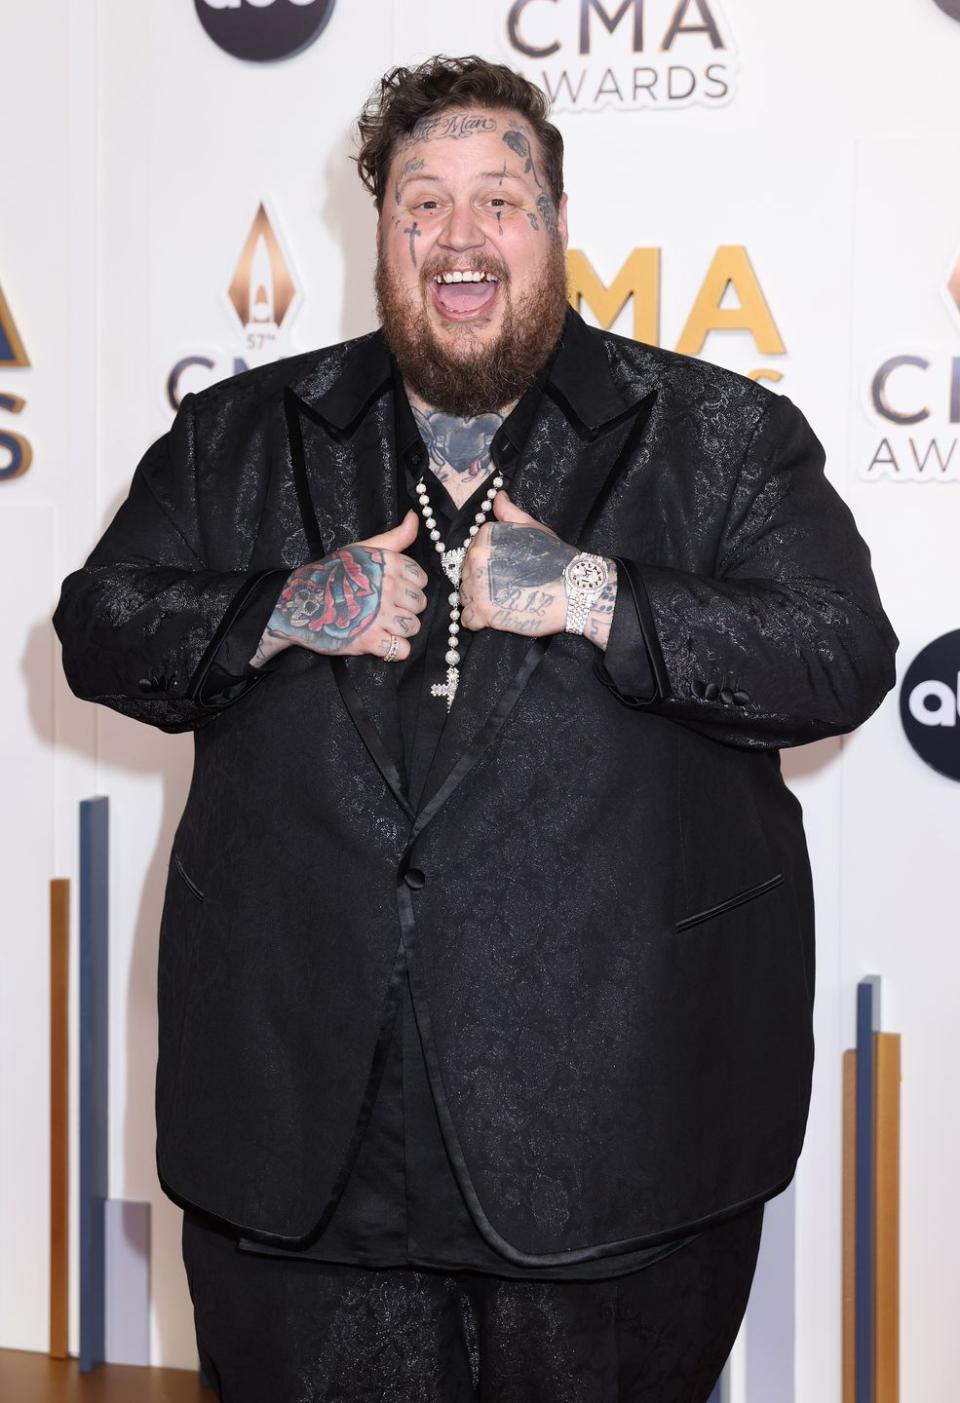 jelly roll holding the front of his suit and smiling upon his arrival at the cma awards